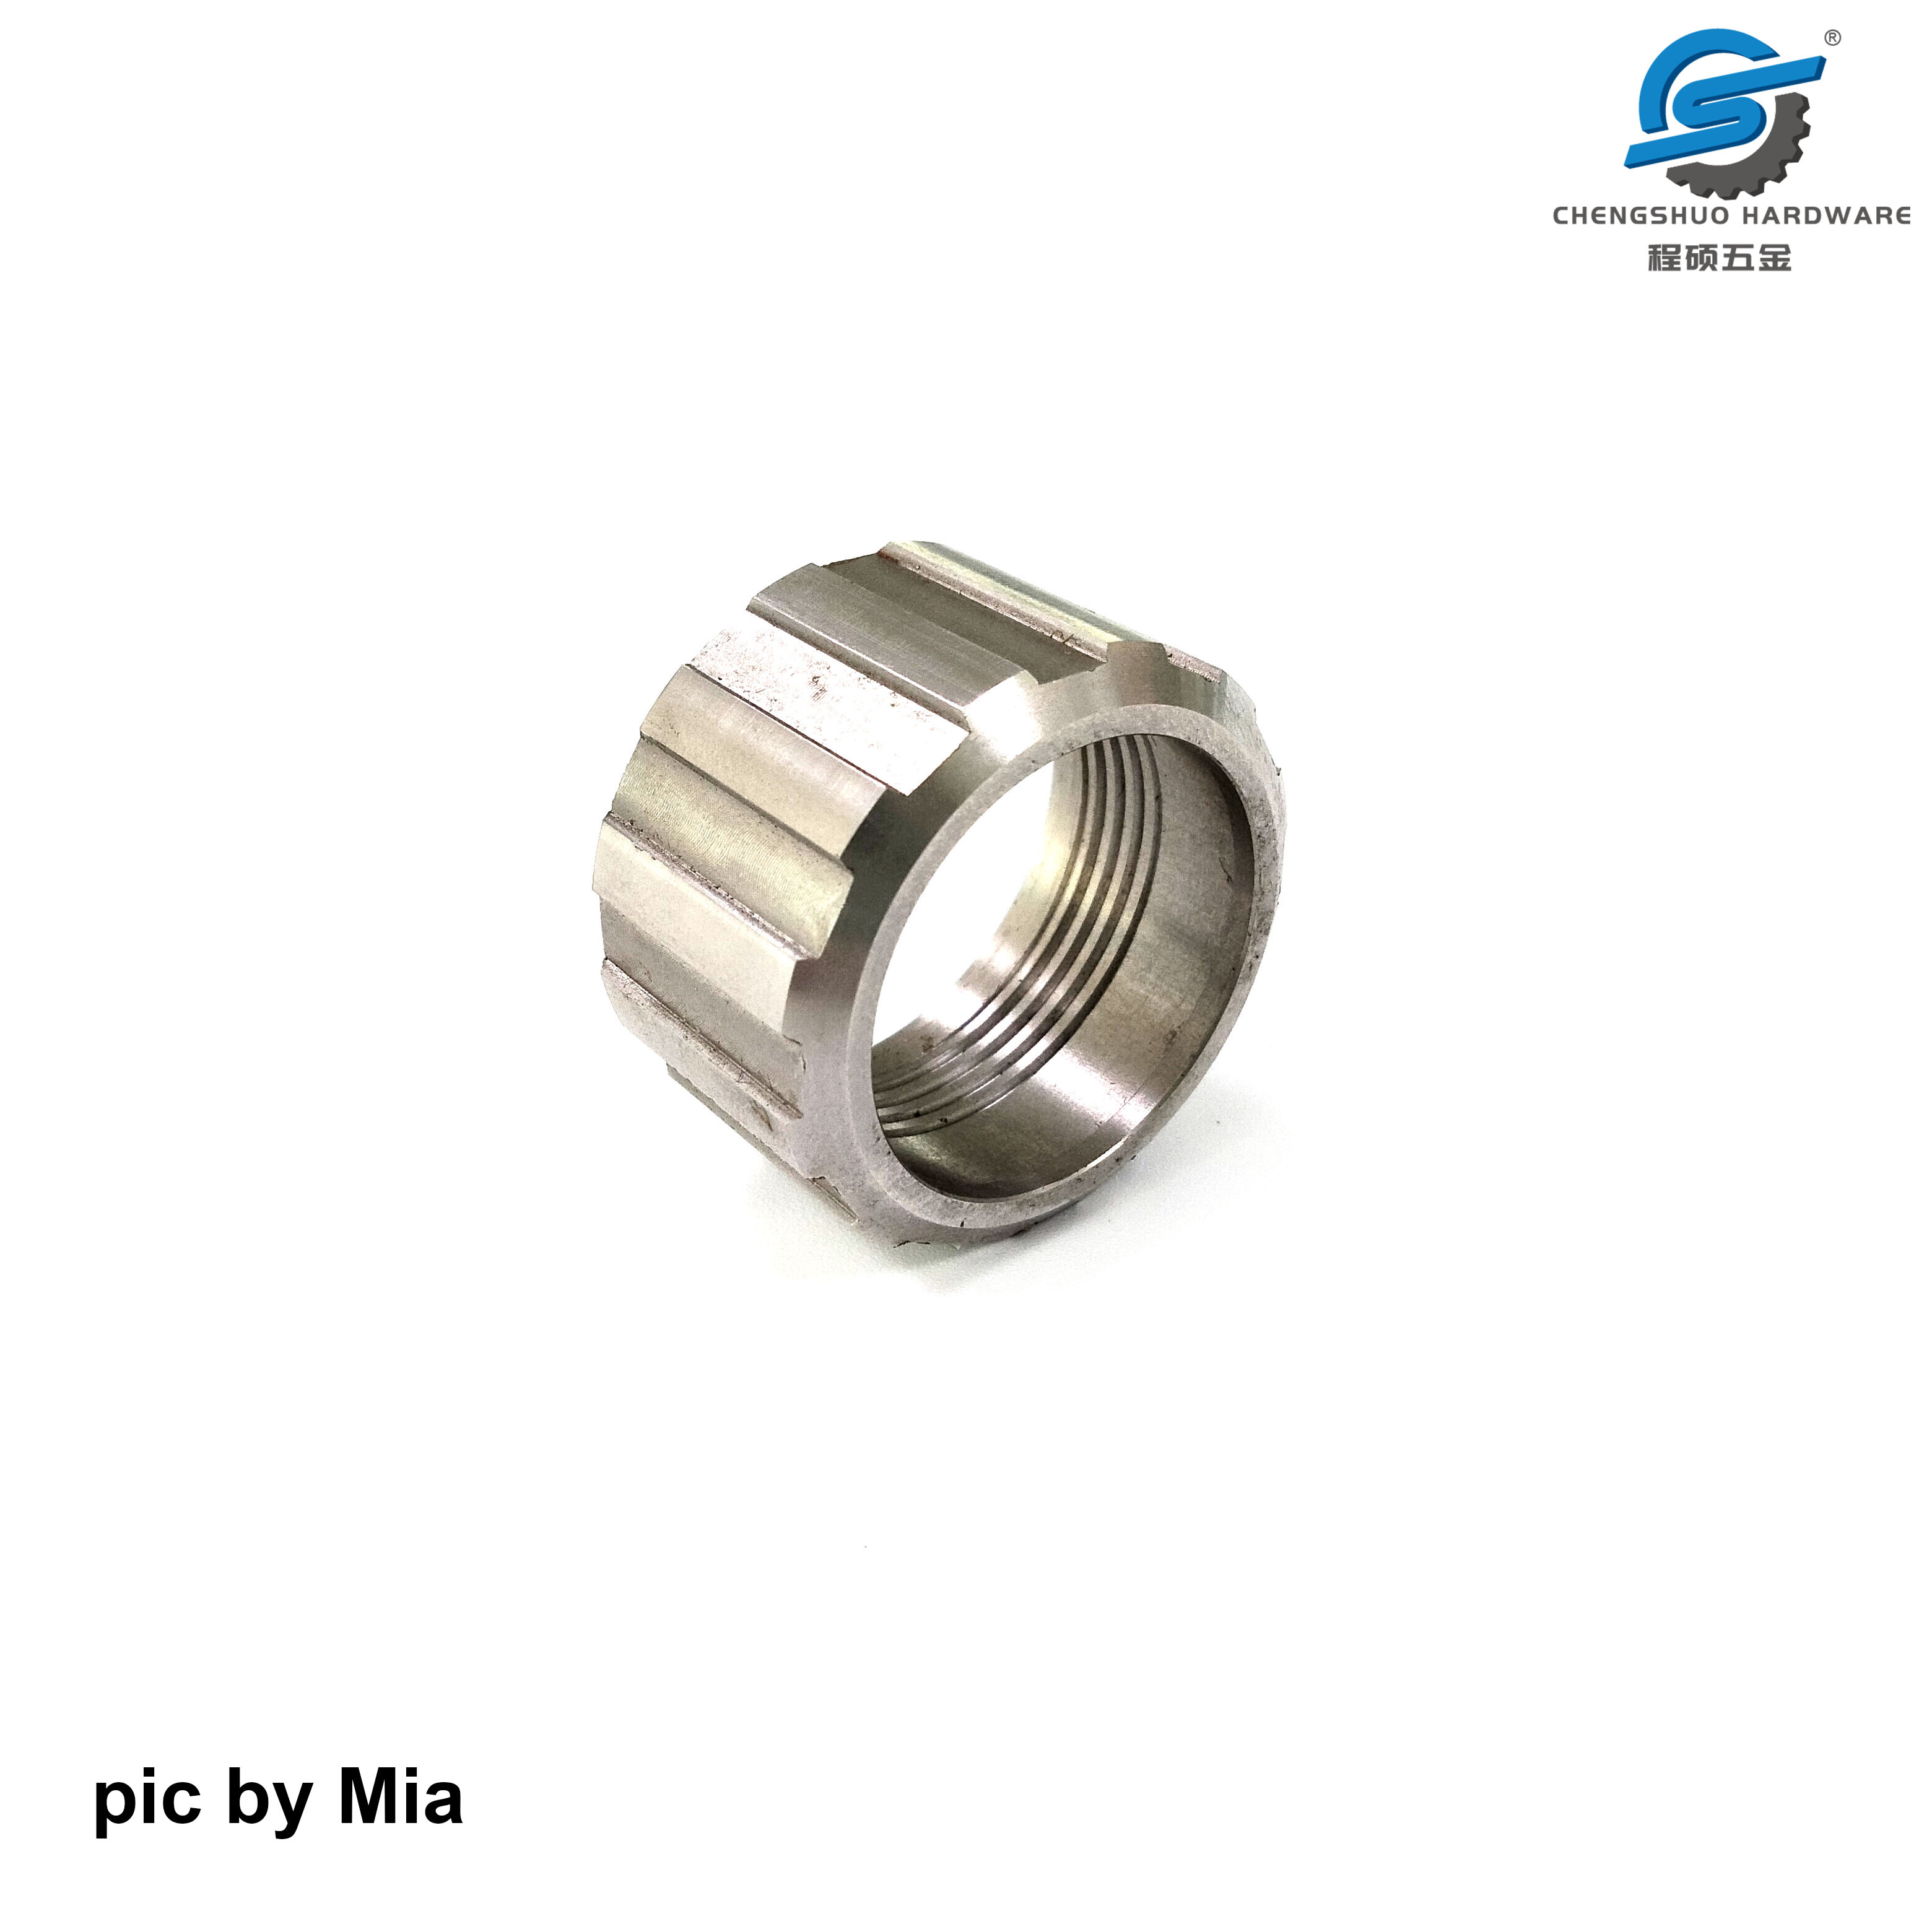 Lock Nut with Internal Thread Multipurpose Metal Parts by Mia